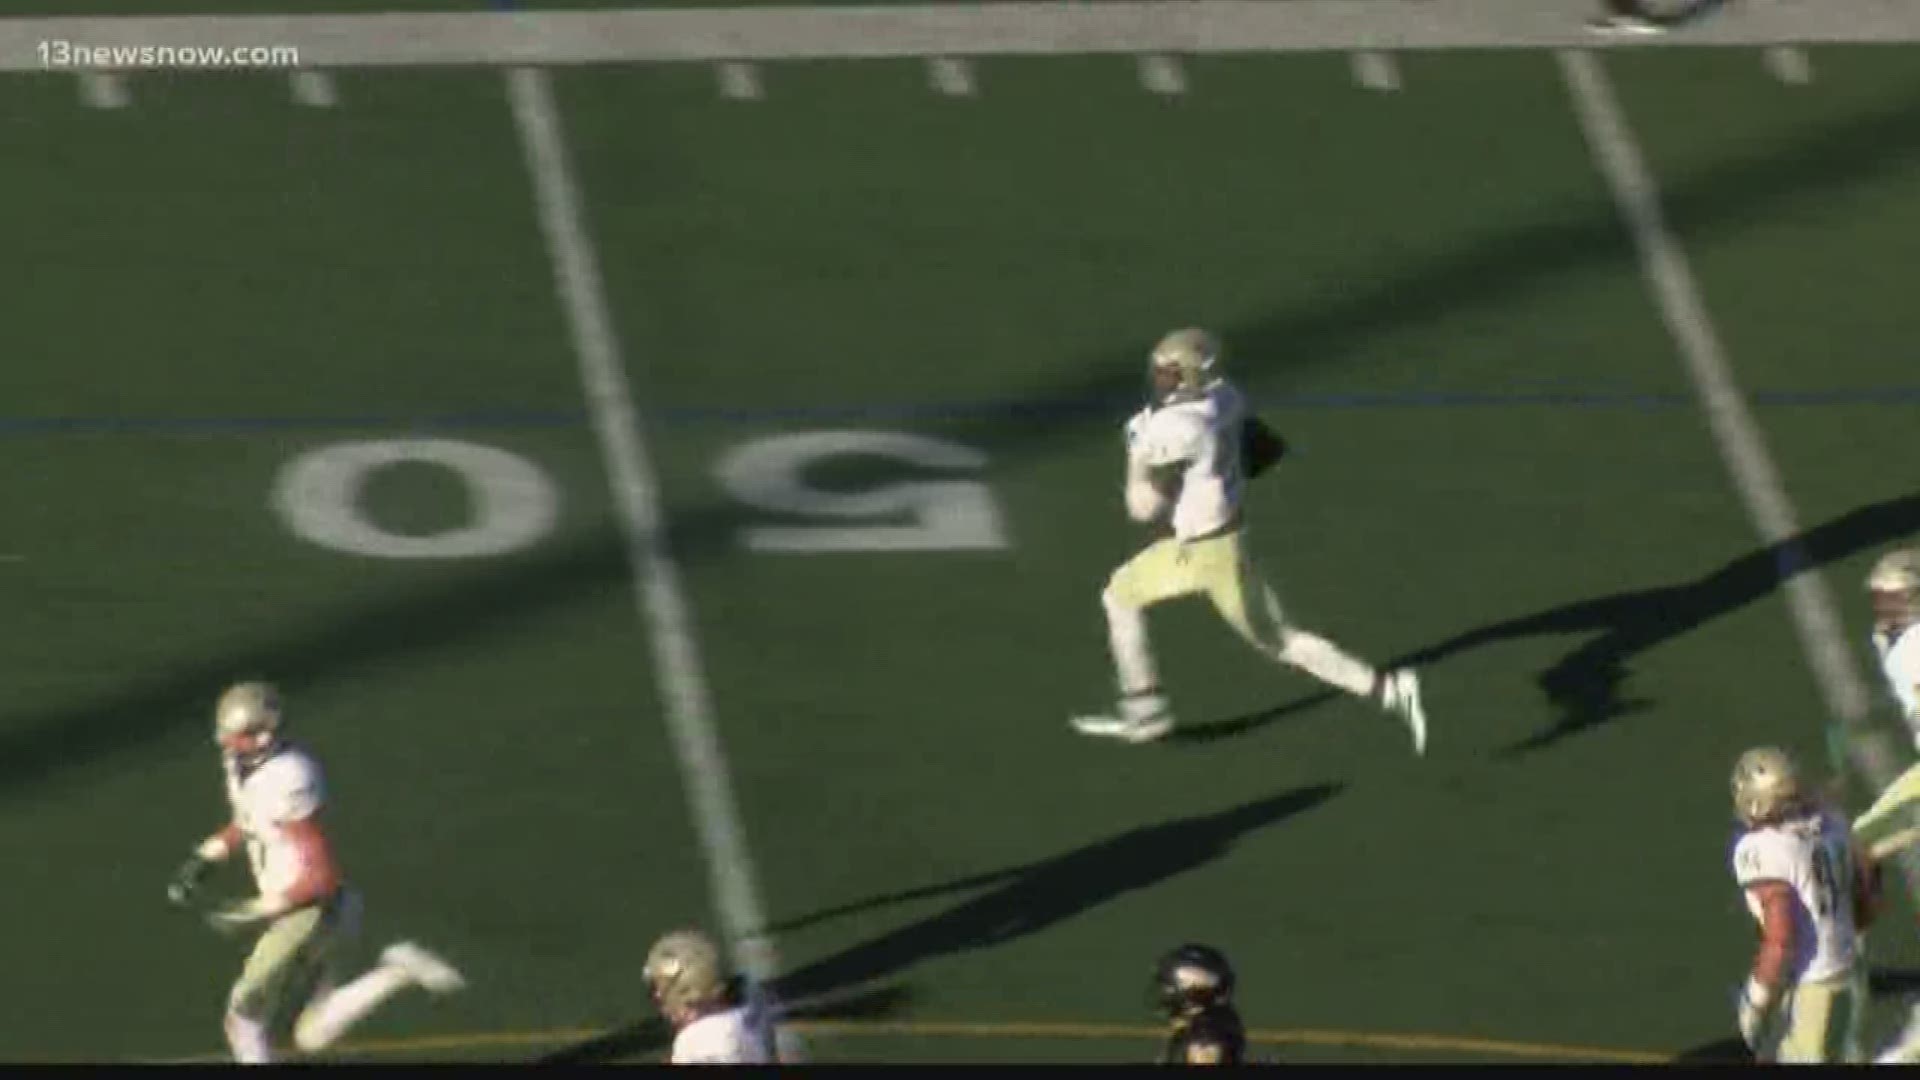 William & Mary struggled trying to hold a halftime lead and lost on the road at Towson 29-13. They're now 2-4.